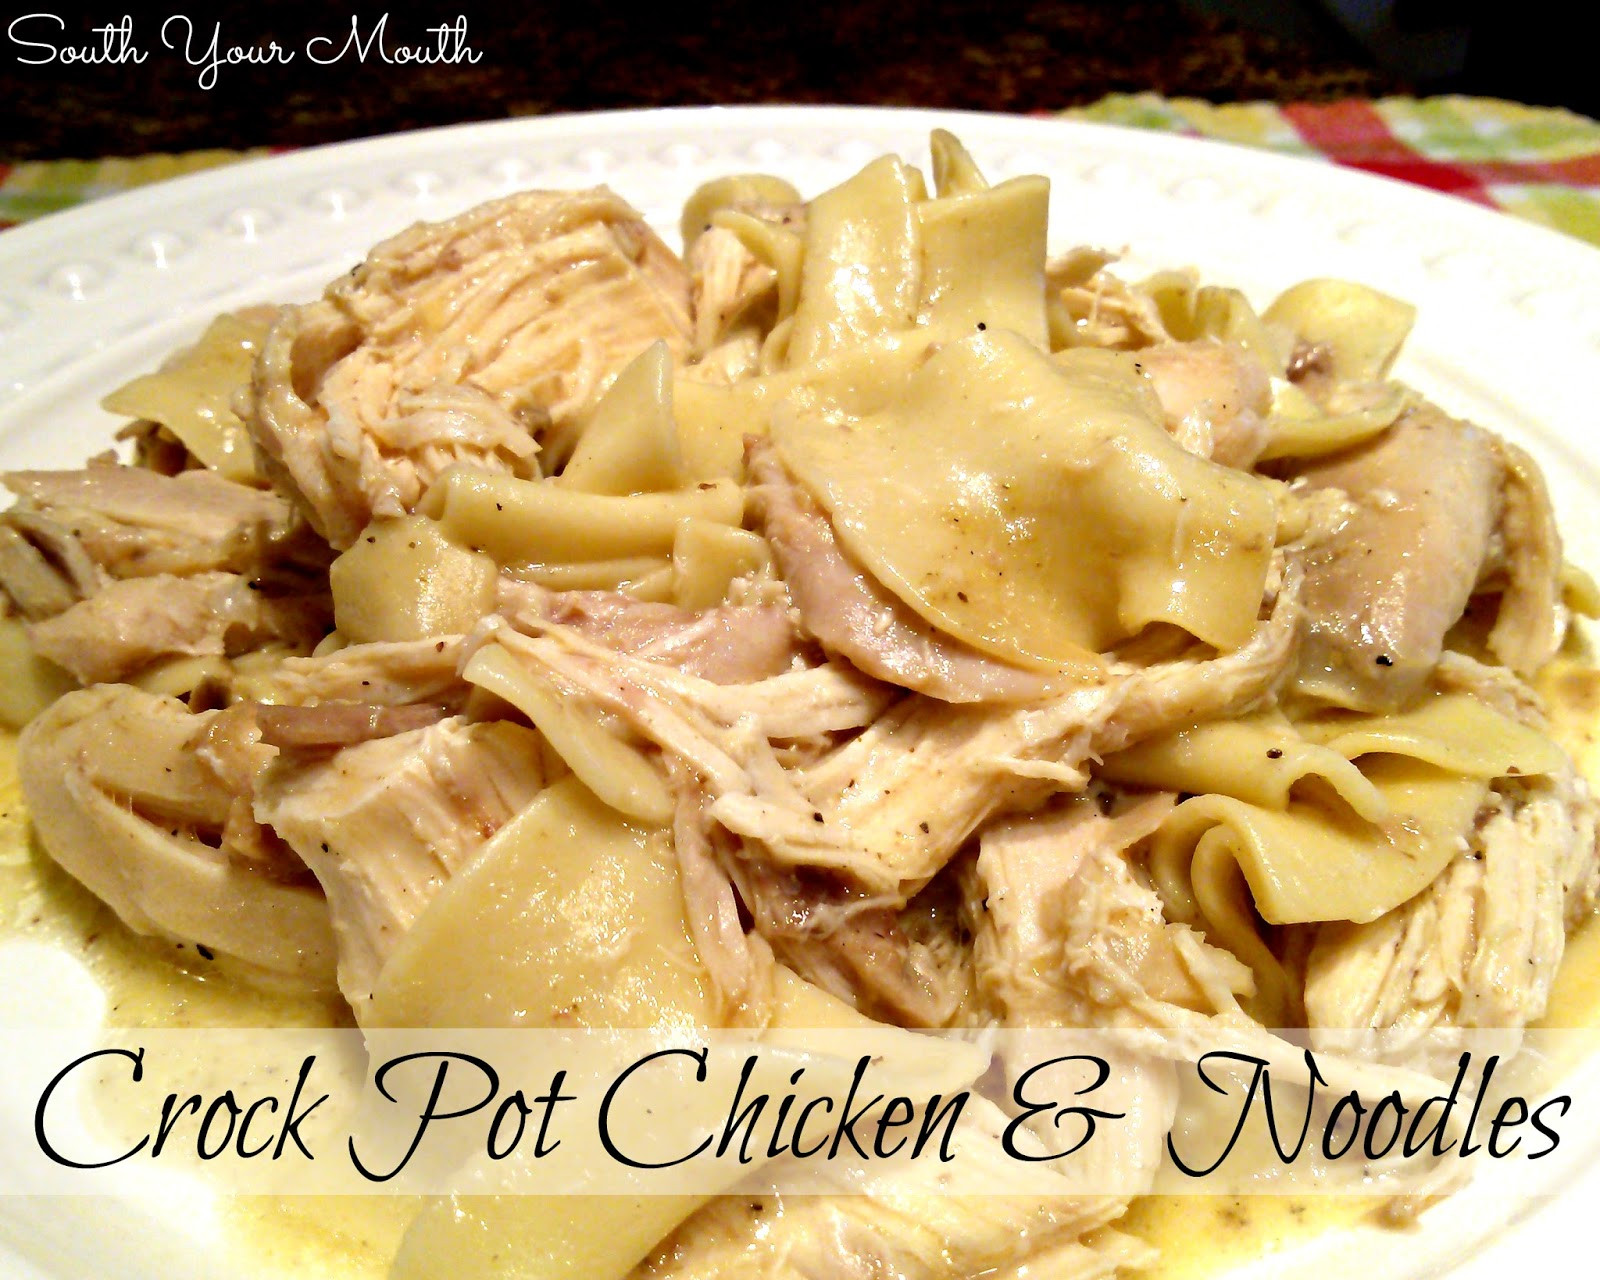 Crockpot Chicken Noodles
 South Your Mouth Crock Pot Chicken and Noodles